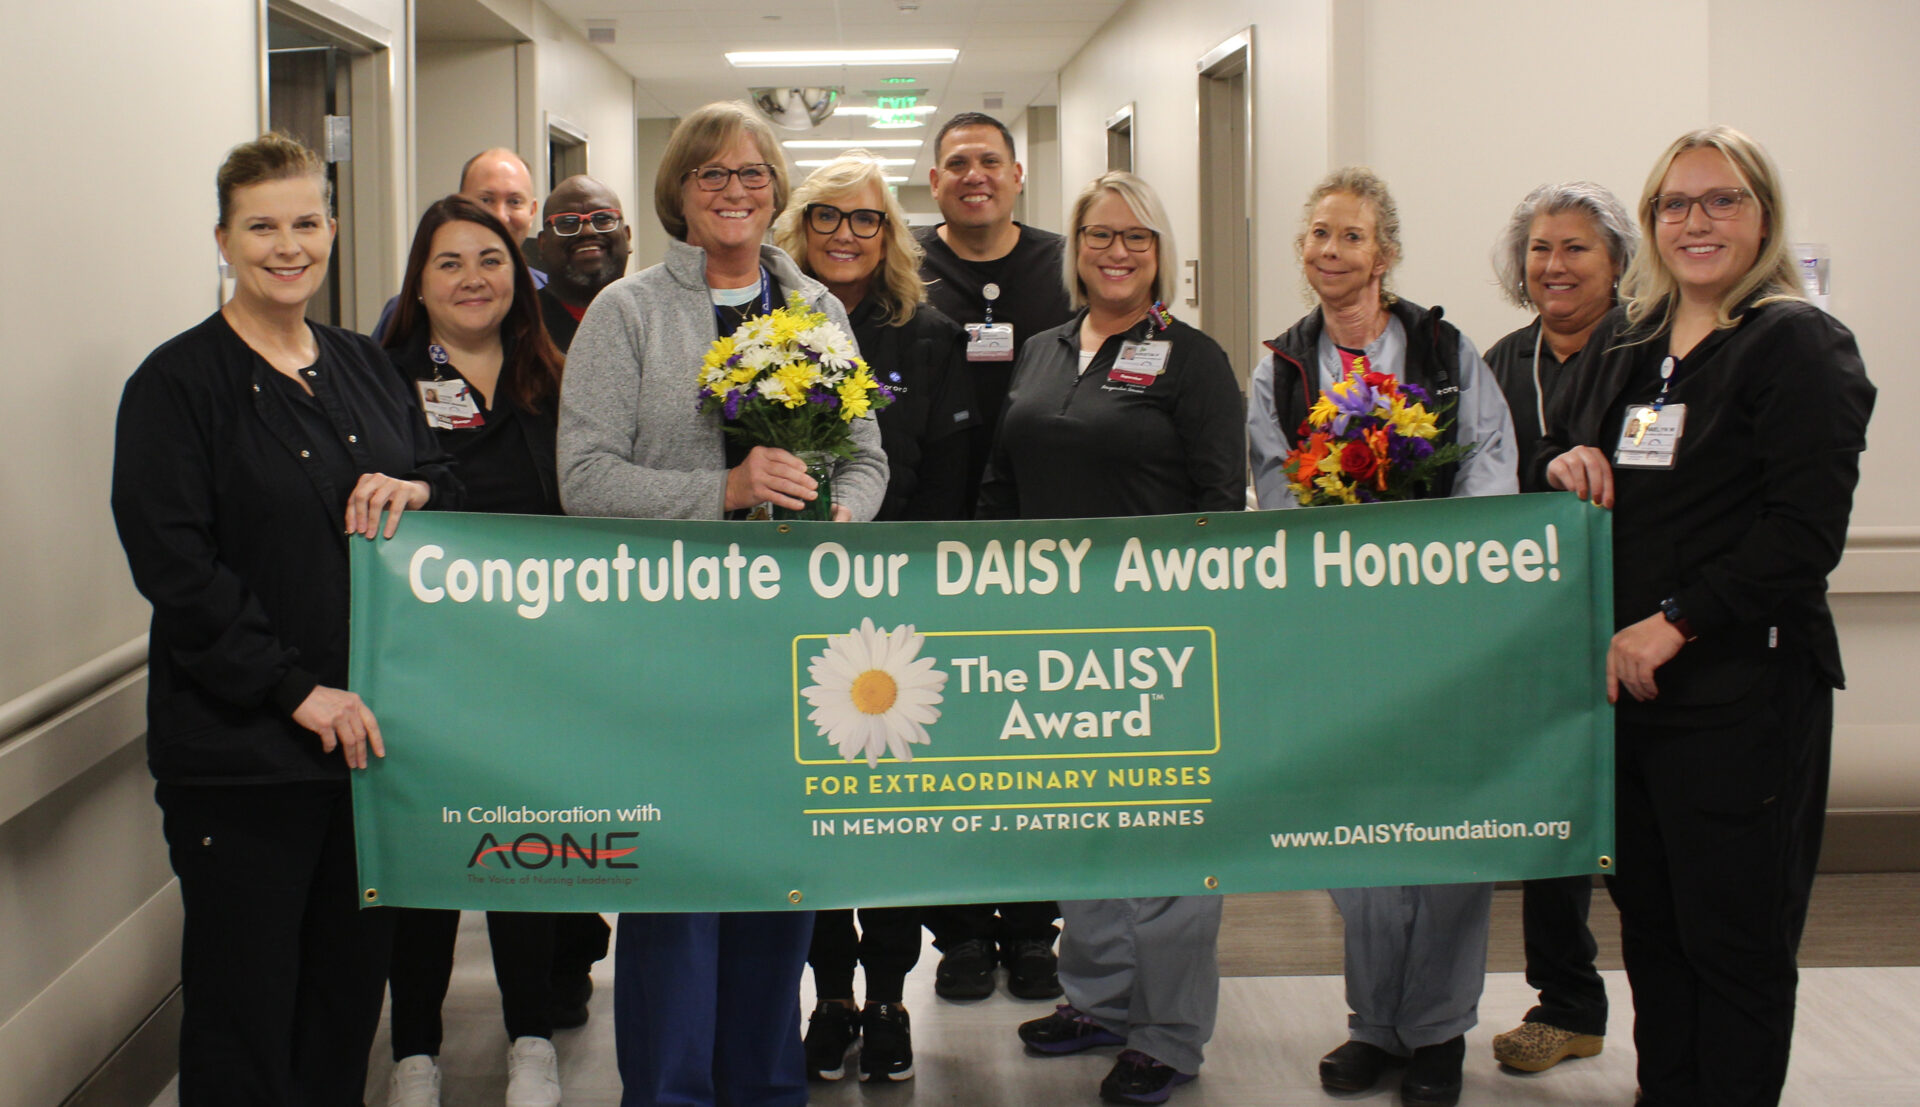 Christy pictured with leadership team and co-workers holding DAISY banner.